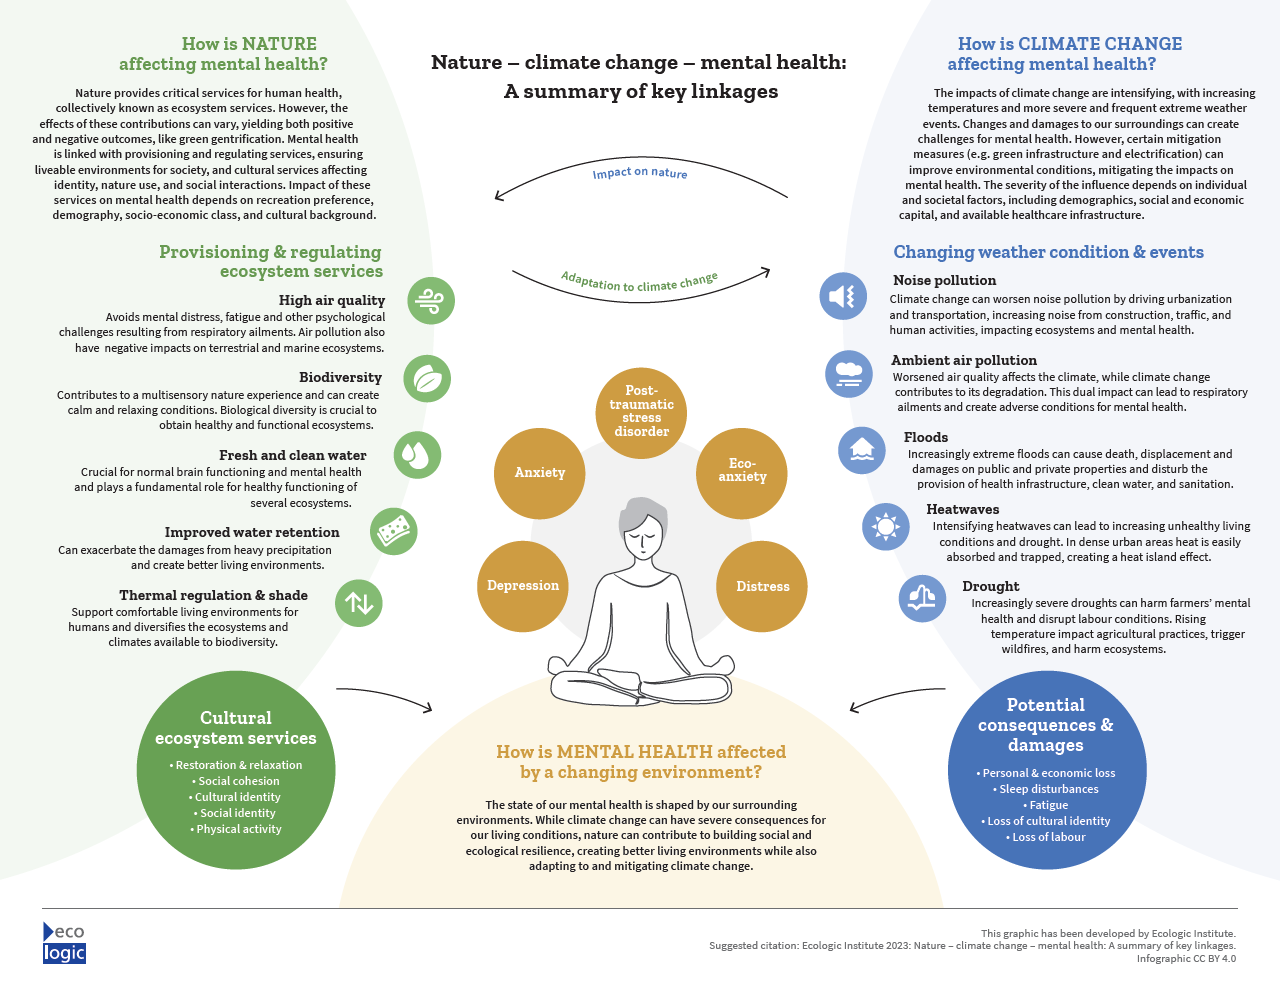 The infographic summarizes the results of the report "The nature – climate change – mental health nexus: A literature review."